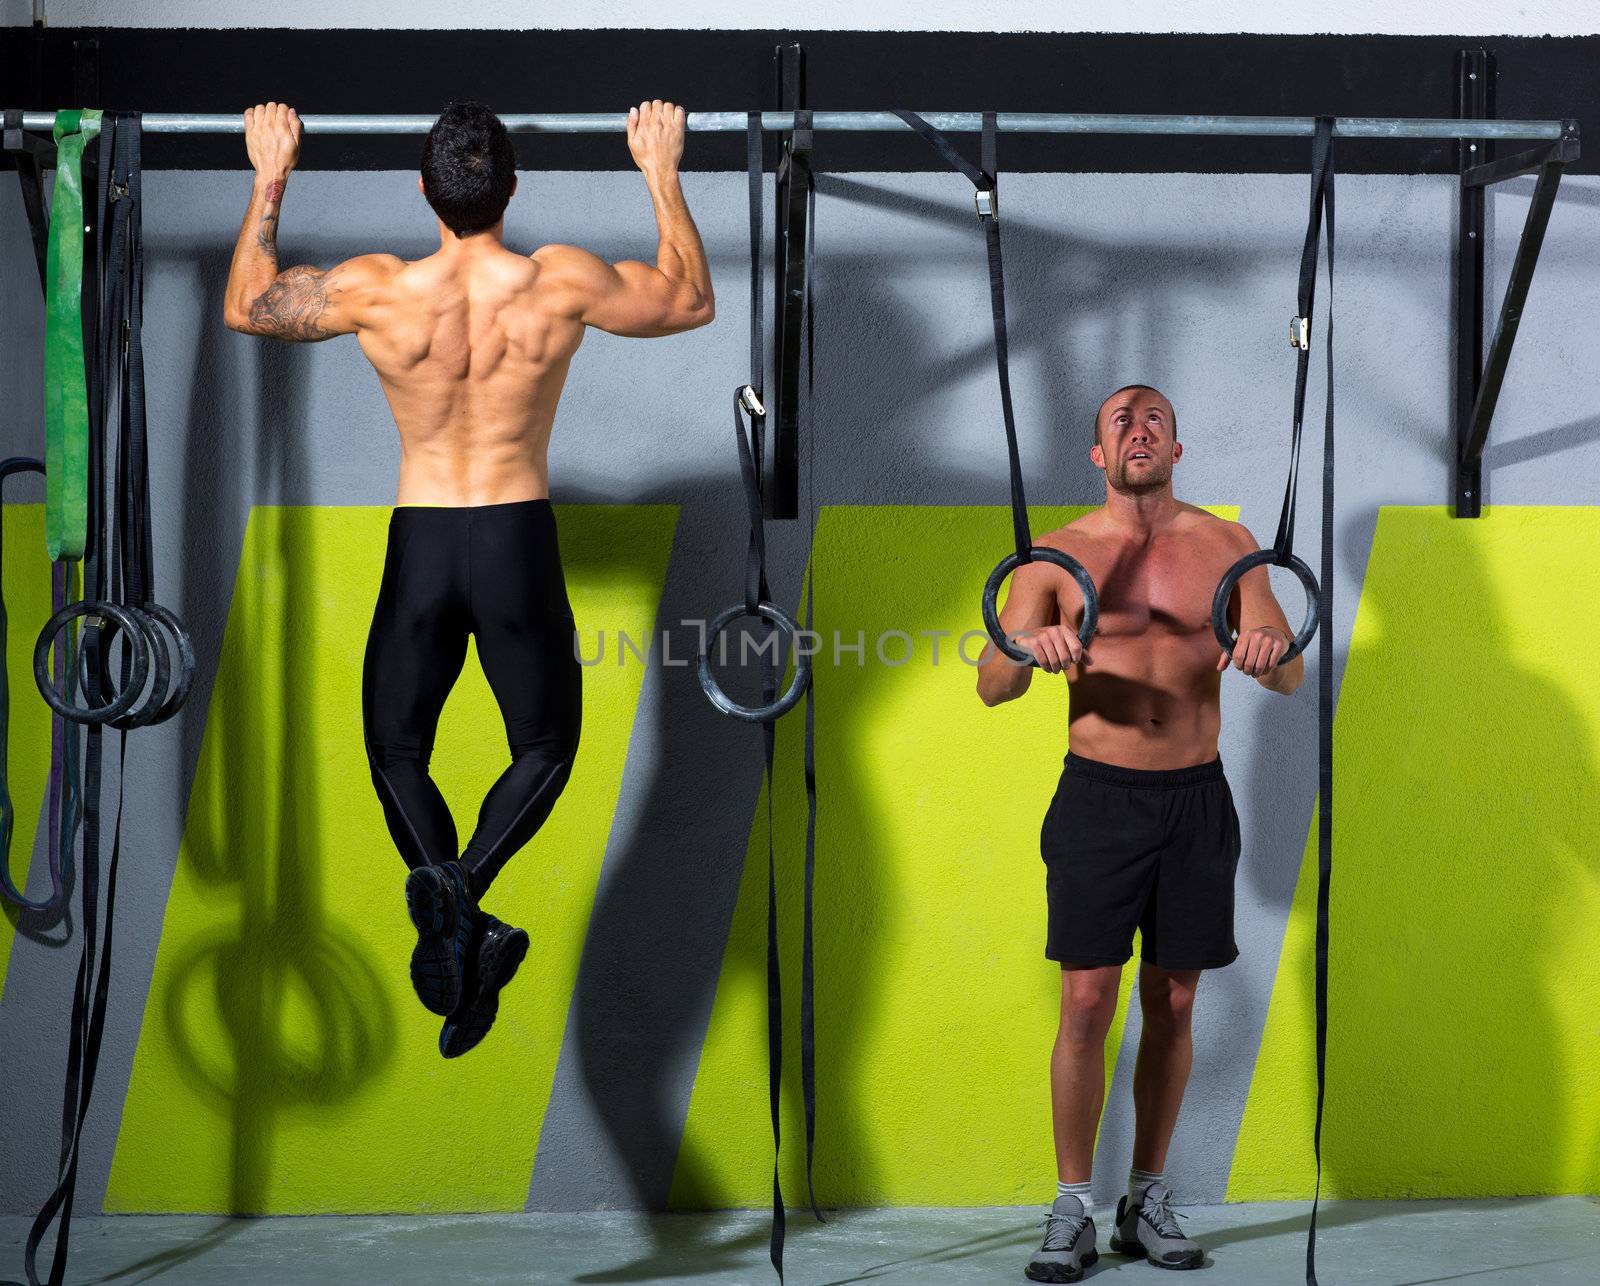 Crossfit dip ring and toes to bar man pull-ups men workout at gym